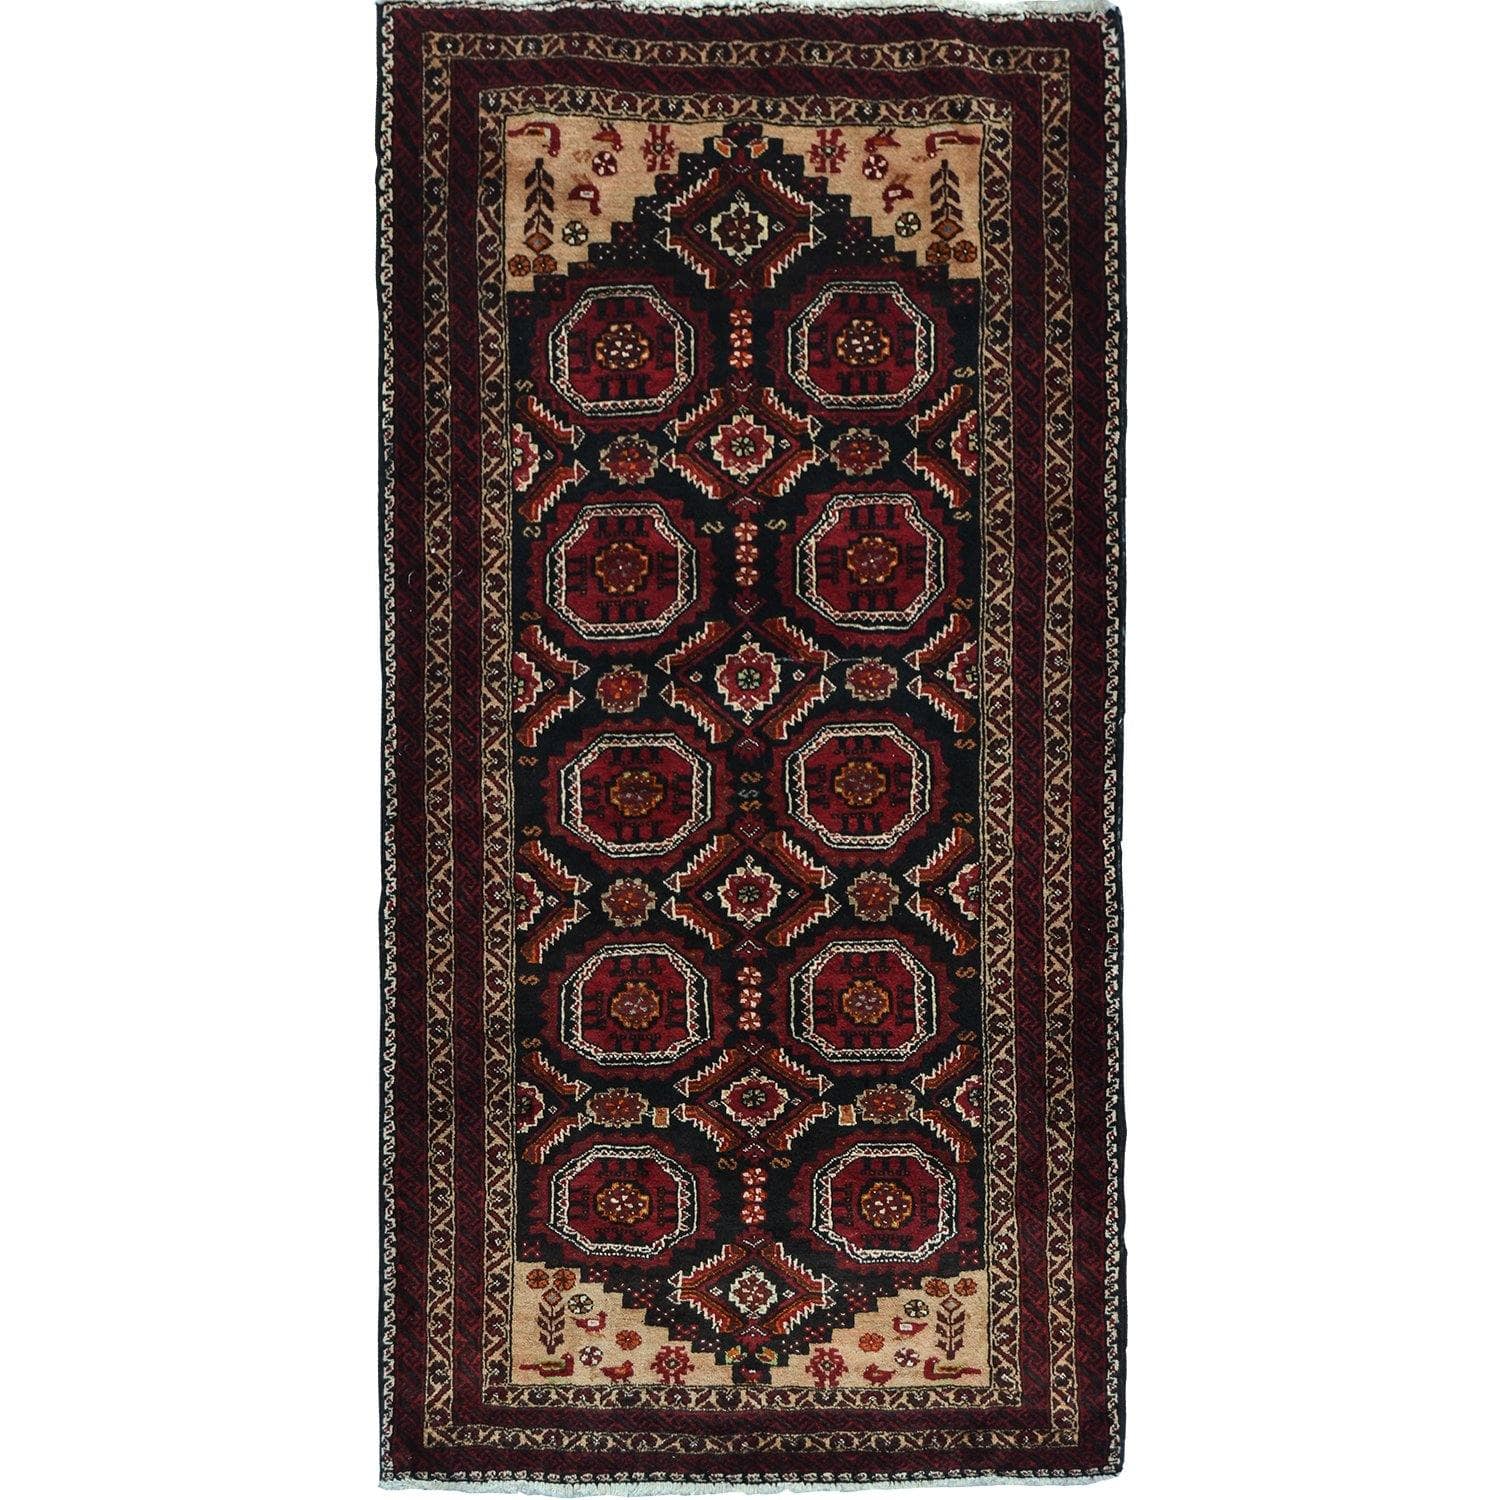 Fine Hand-knotted Wool Baluchi Persian Rug 98cm x 192cm